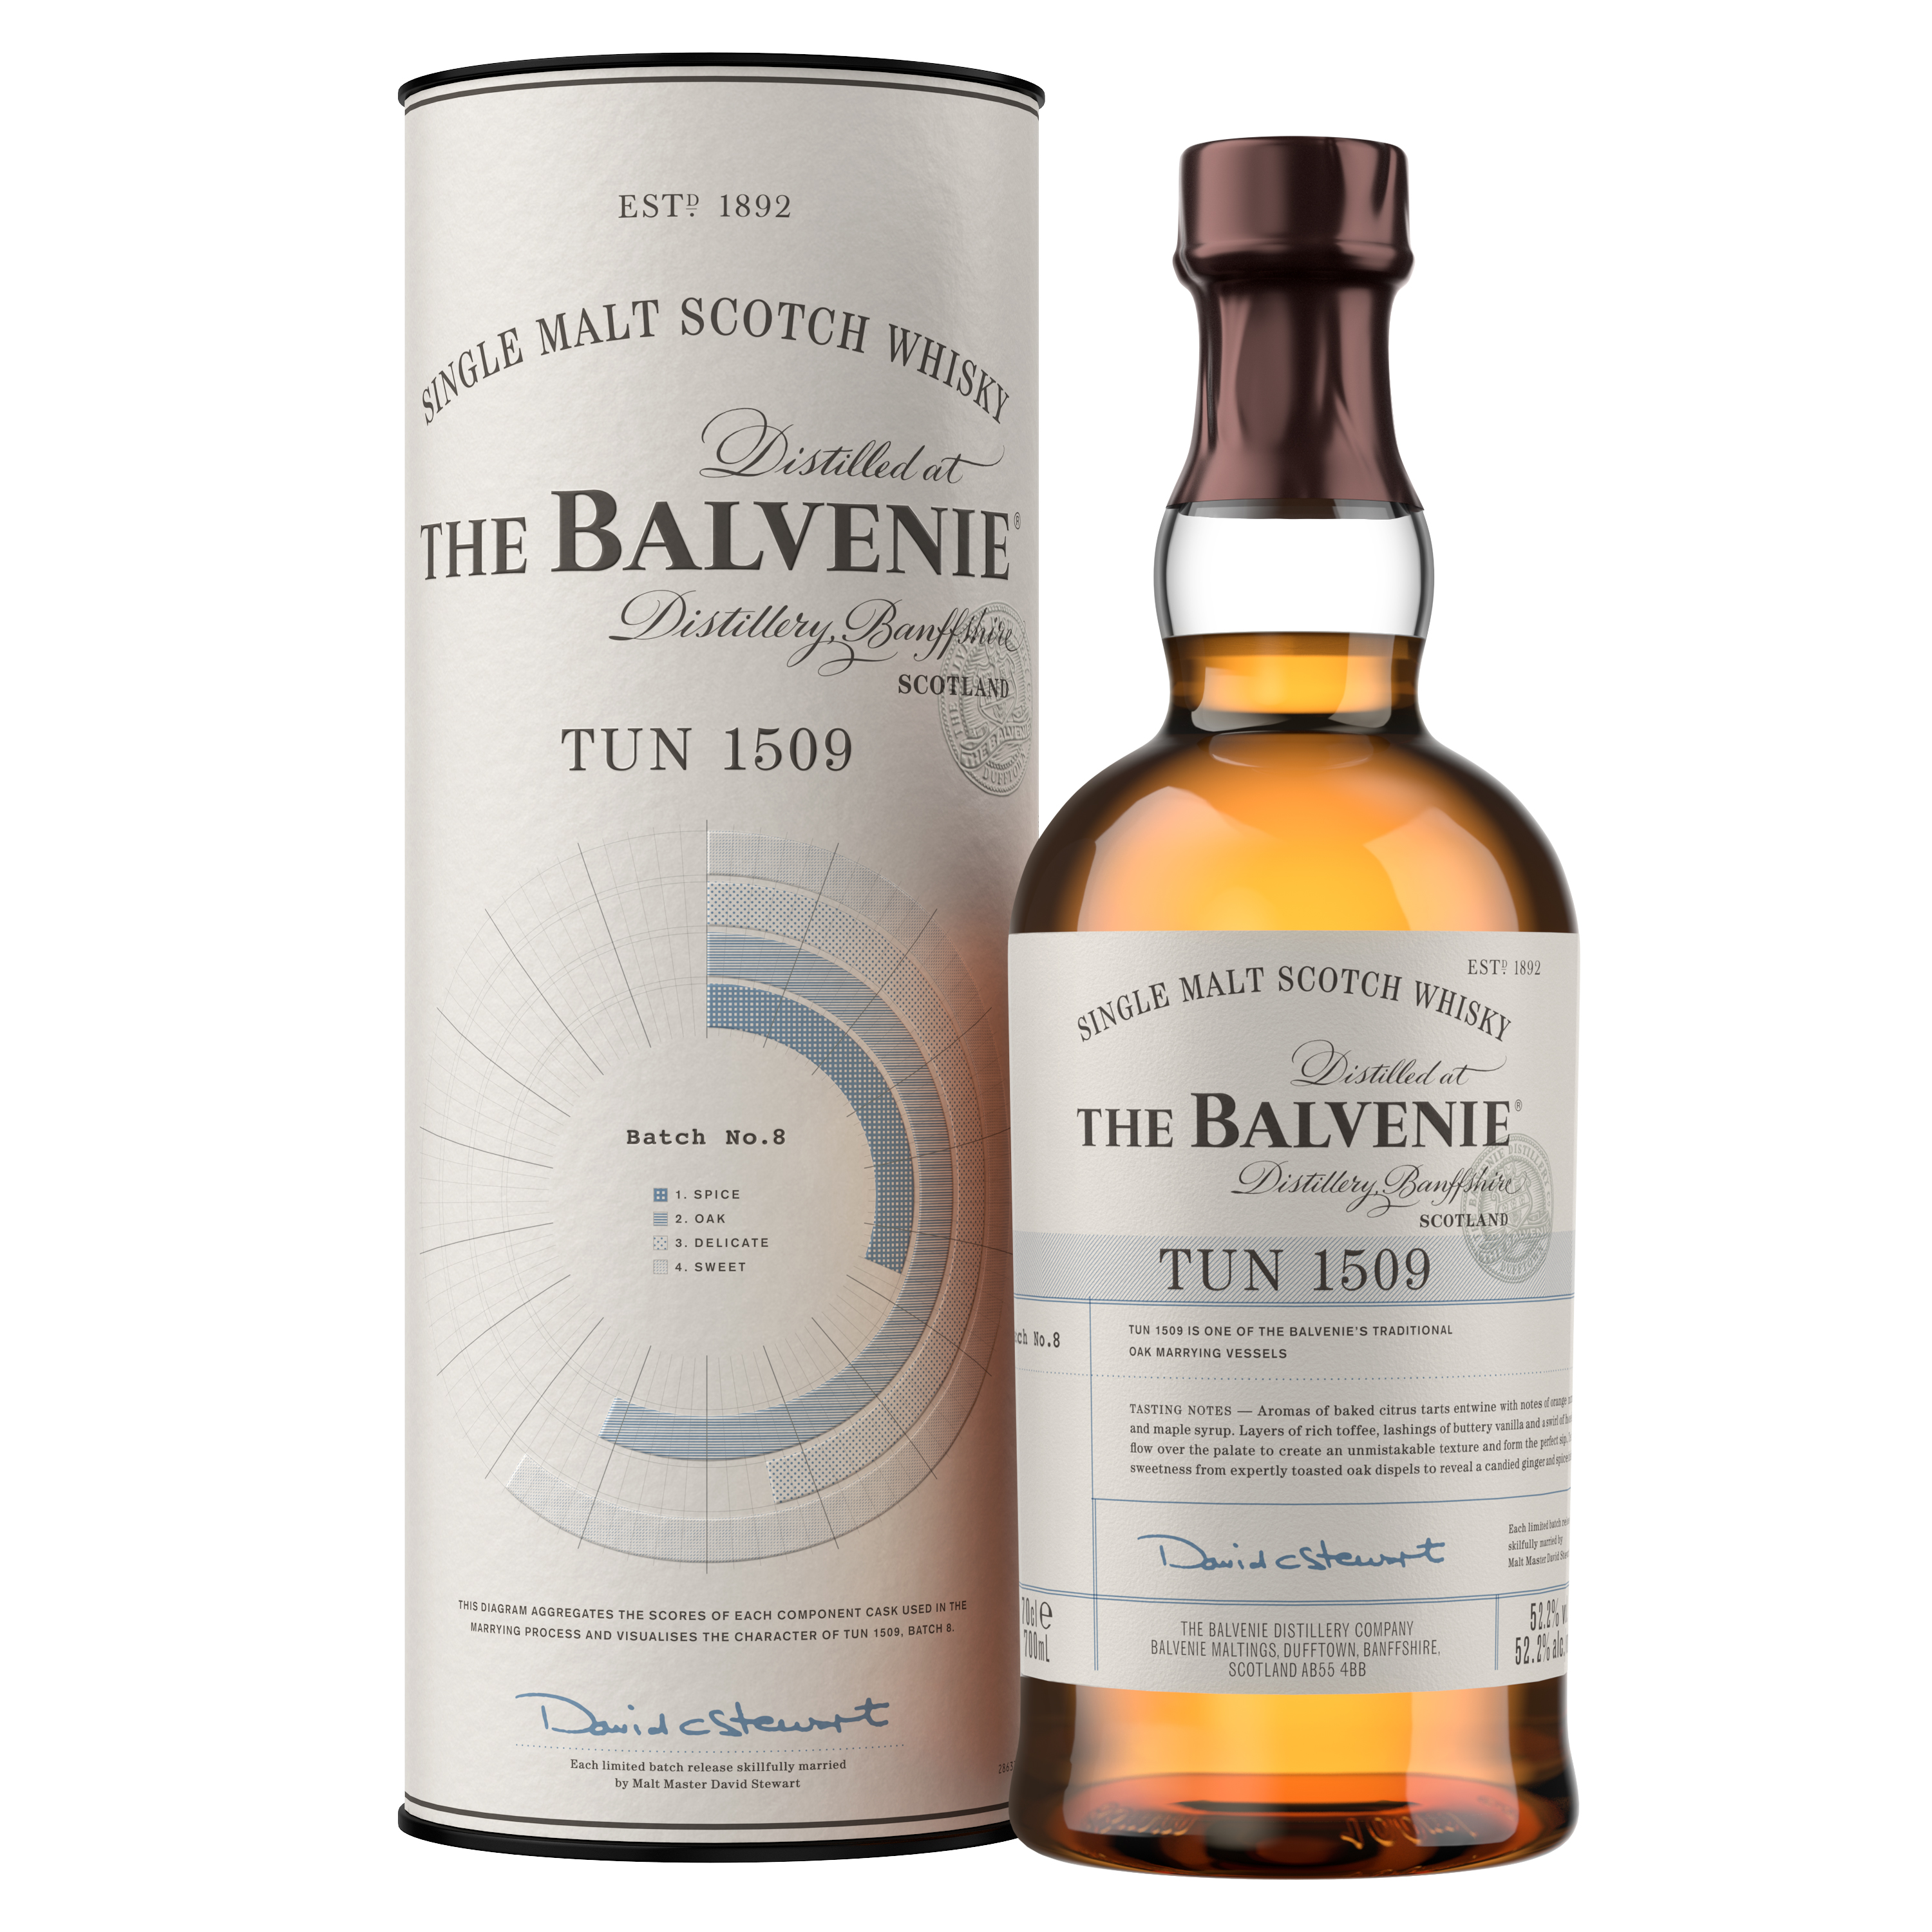 Discover the best drams to enjoy on Burns Night